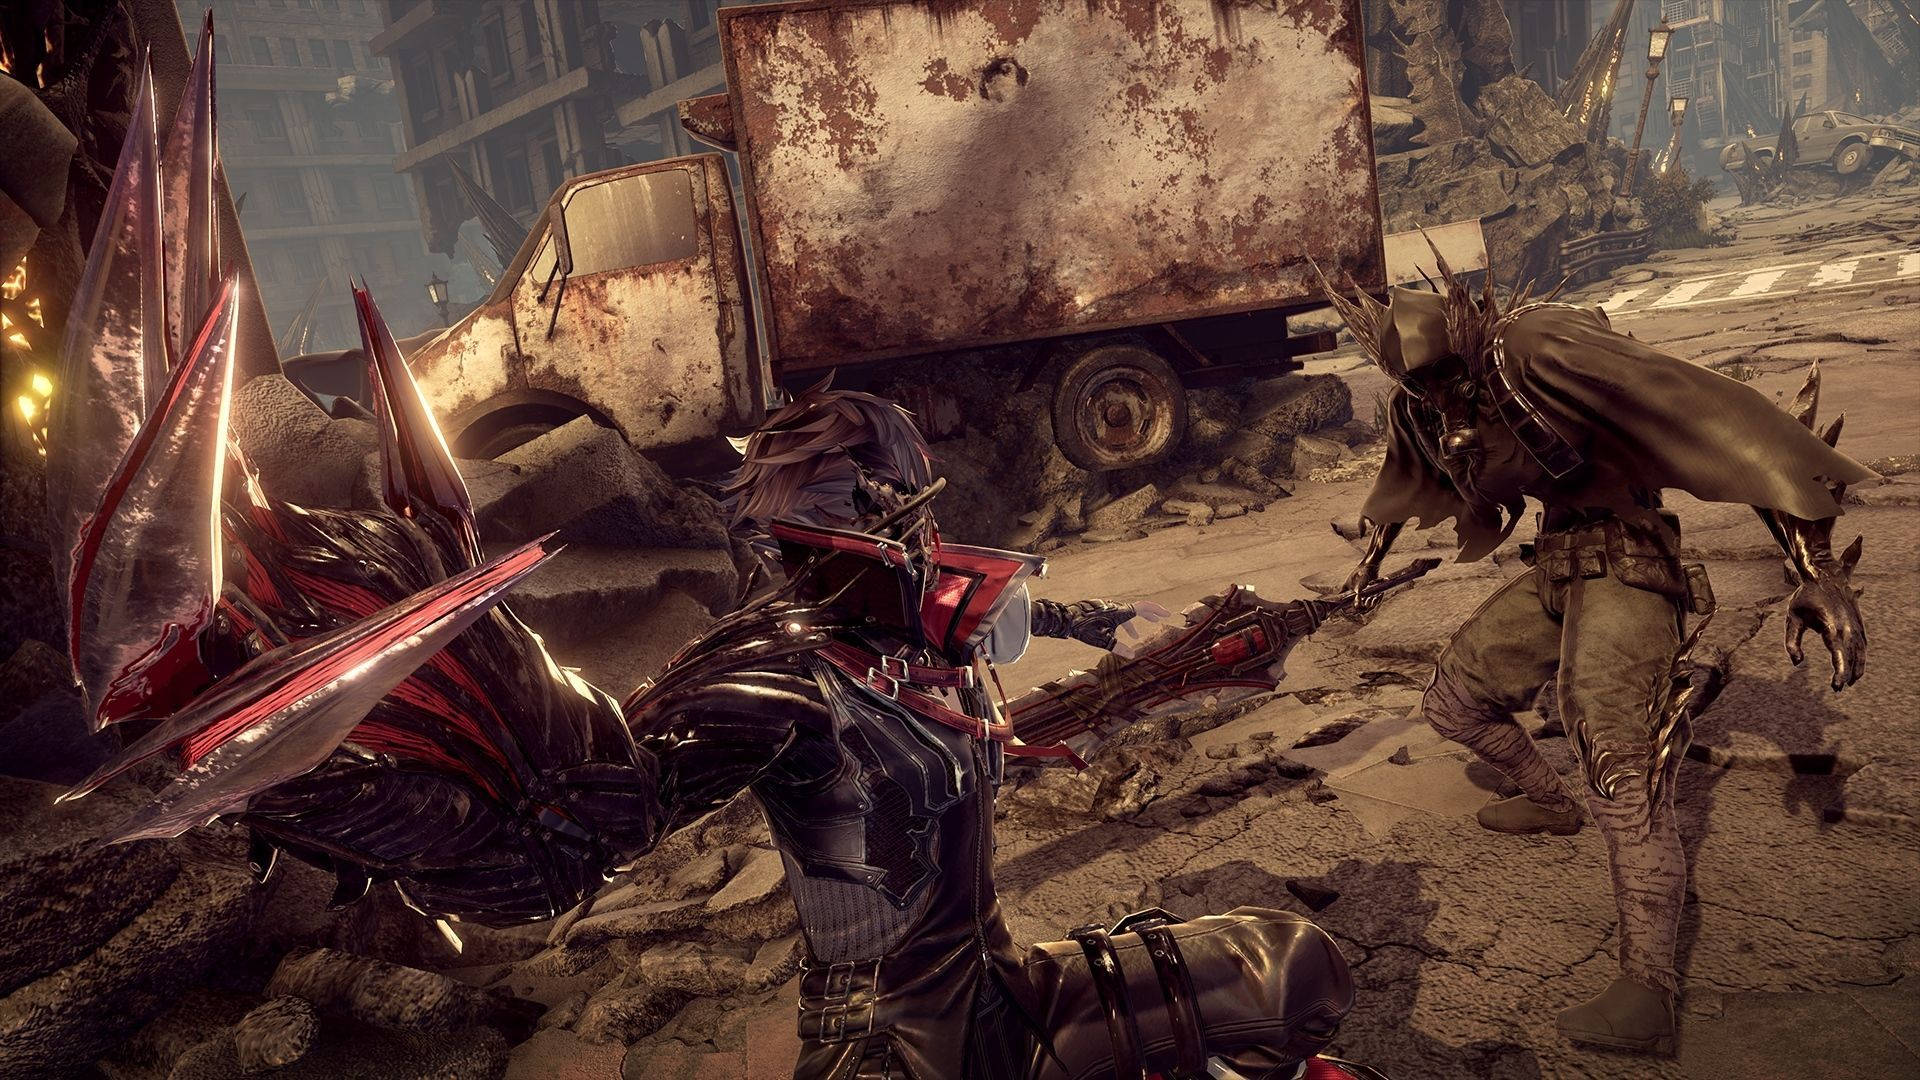 “Explore a post-apocalyptic world in Code Vein” Wallpaper